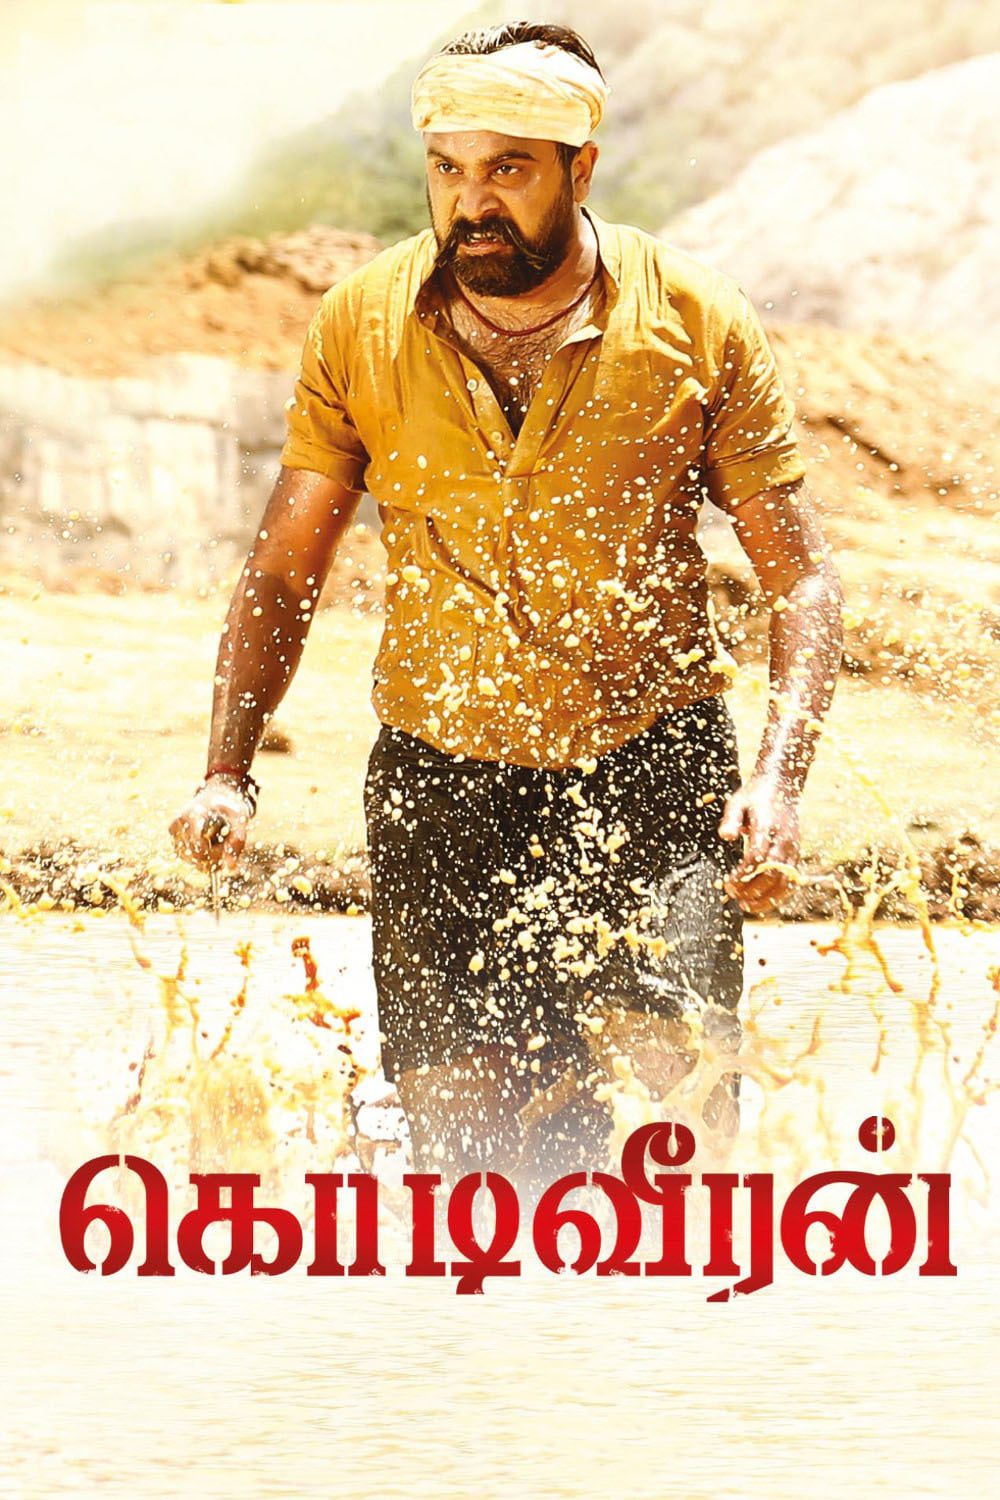 Poster for the movie "Kodiveeran"